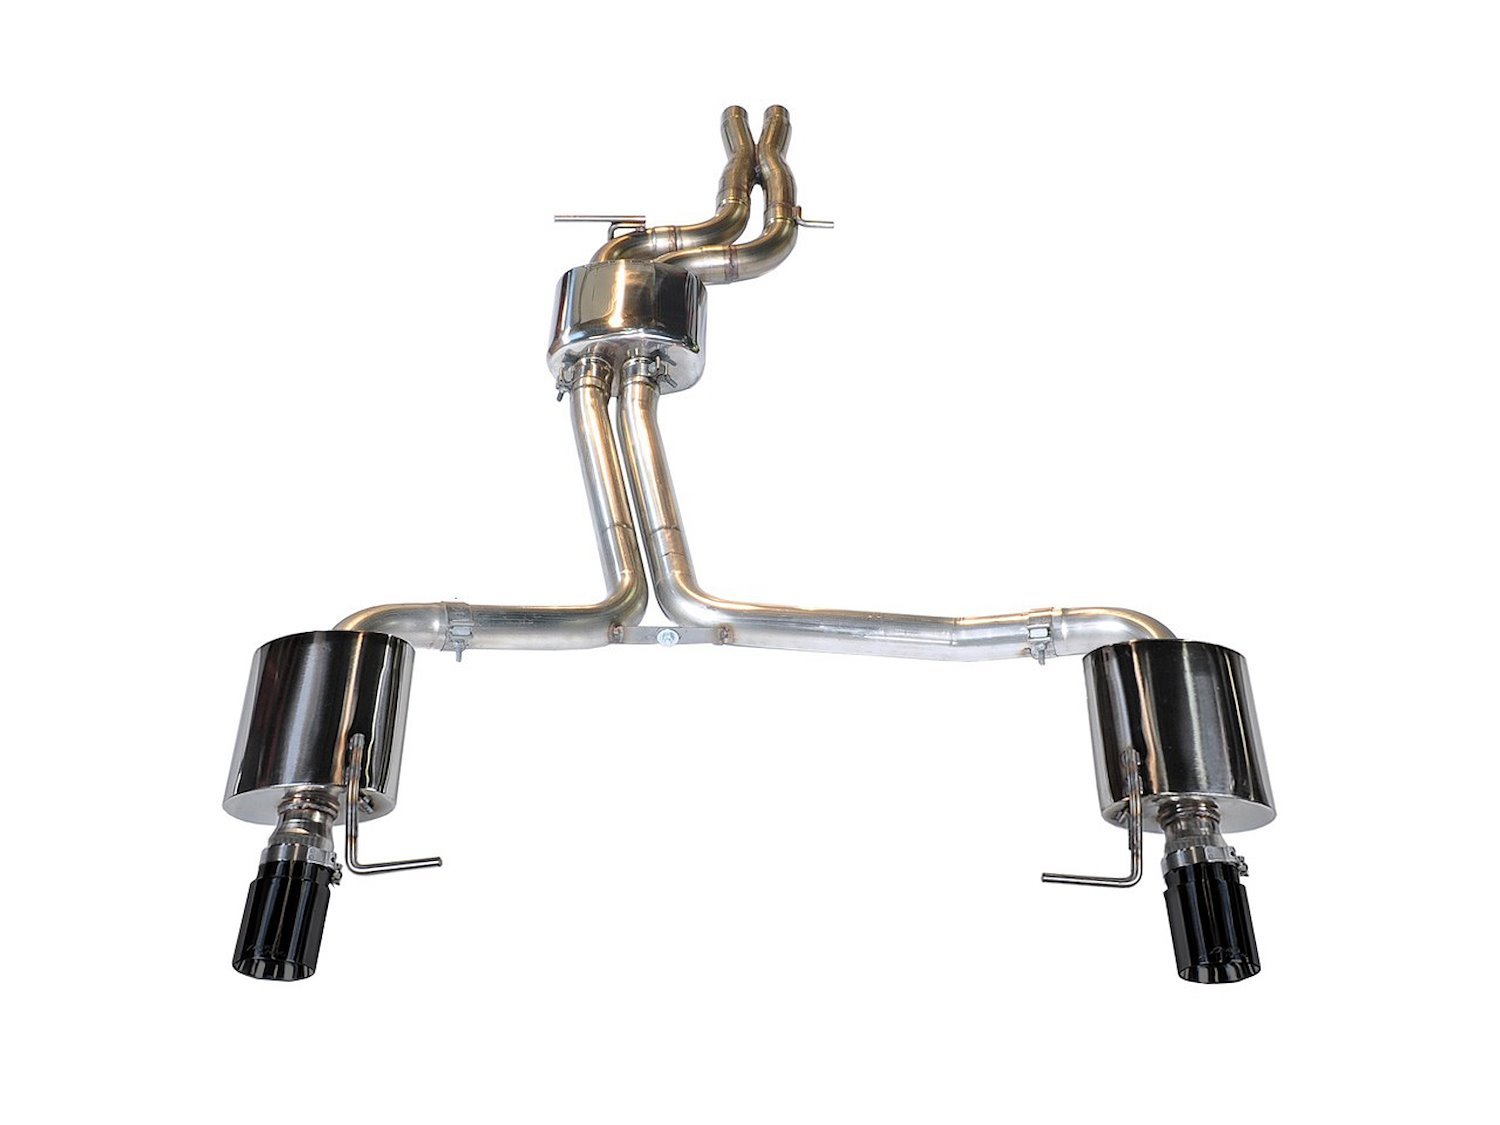 AWE Touring Edition Exhaust for Audi C7 A6 3.0T - Dual Outlet, Diamond Black Tips